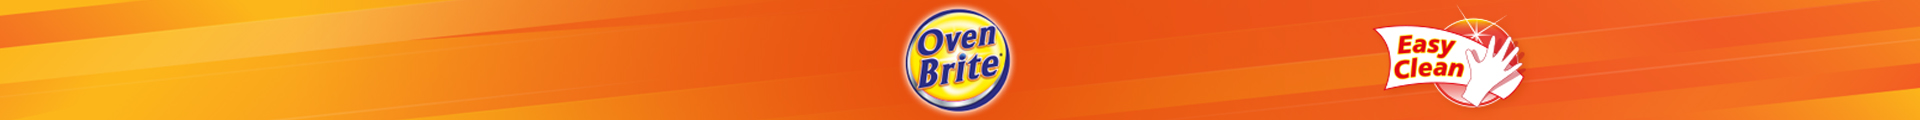 Ovenbrite Oven Cleaning